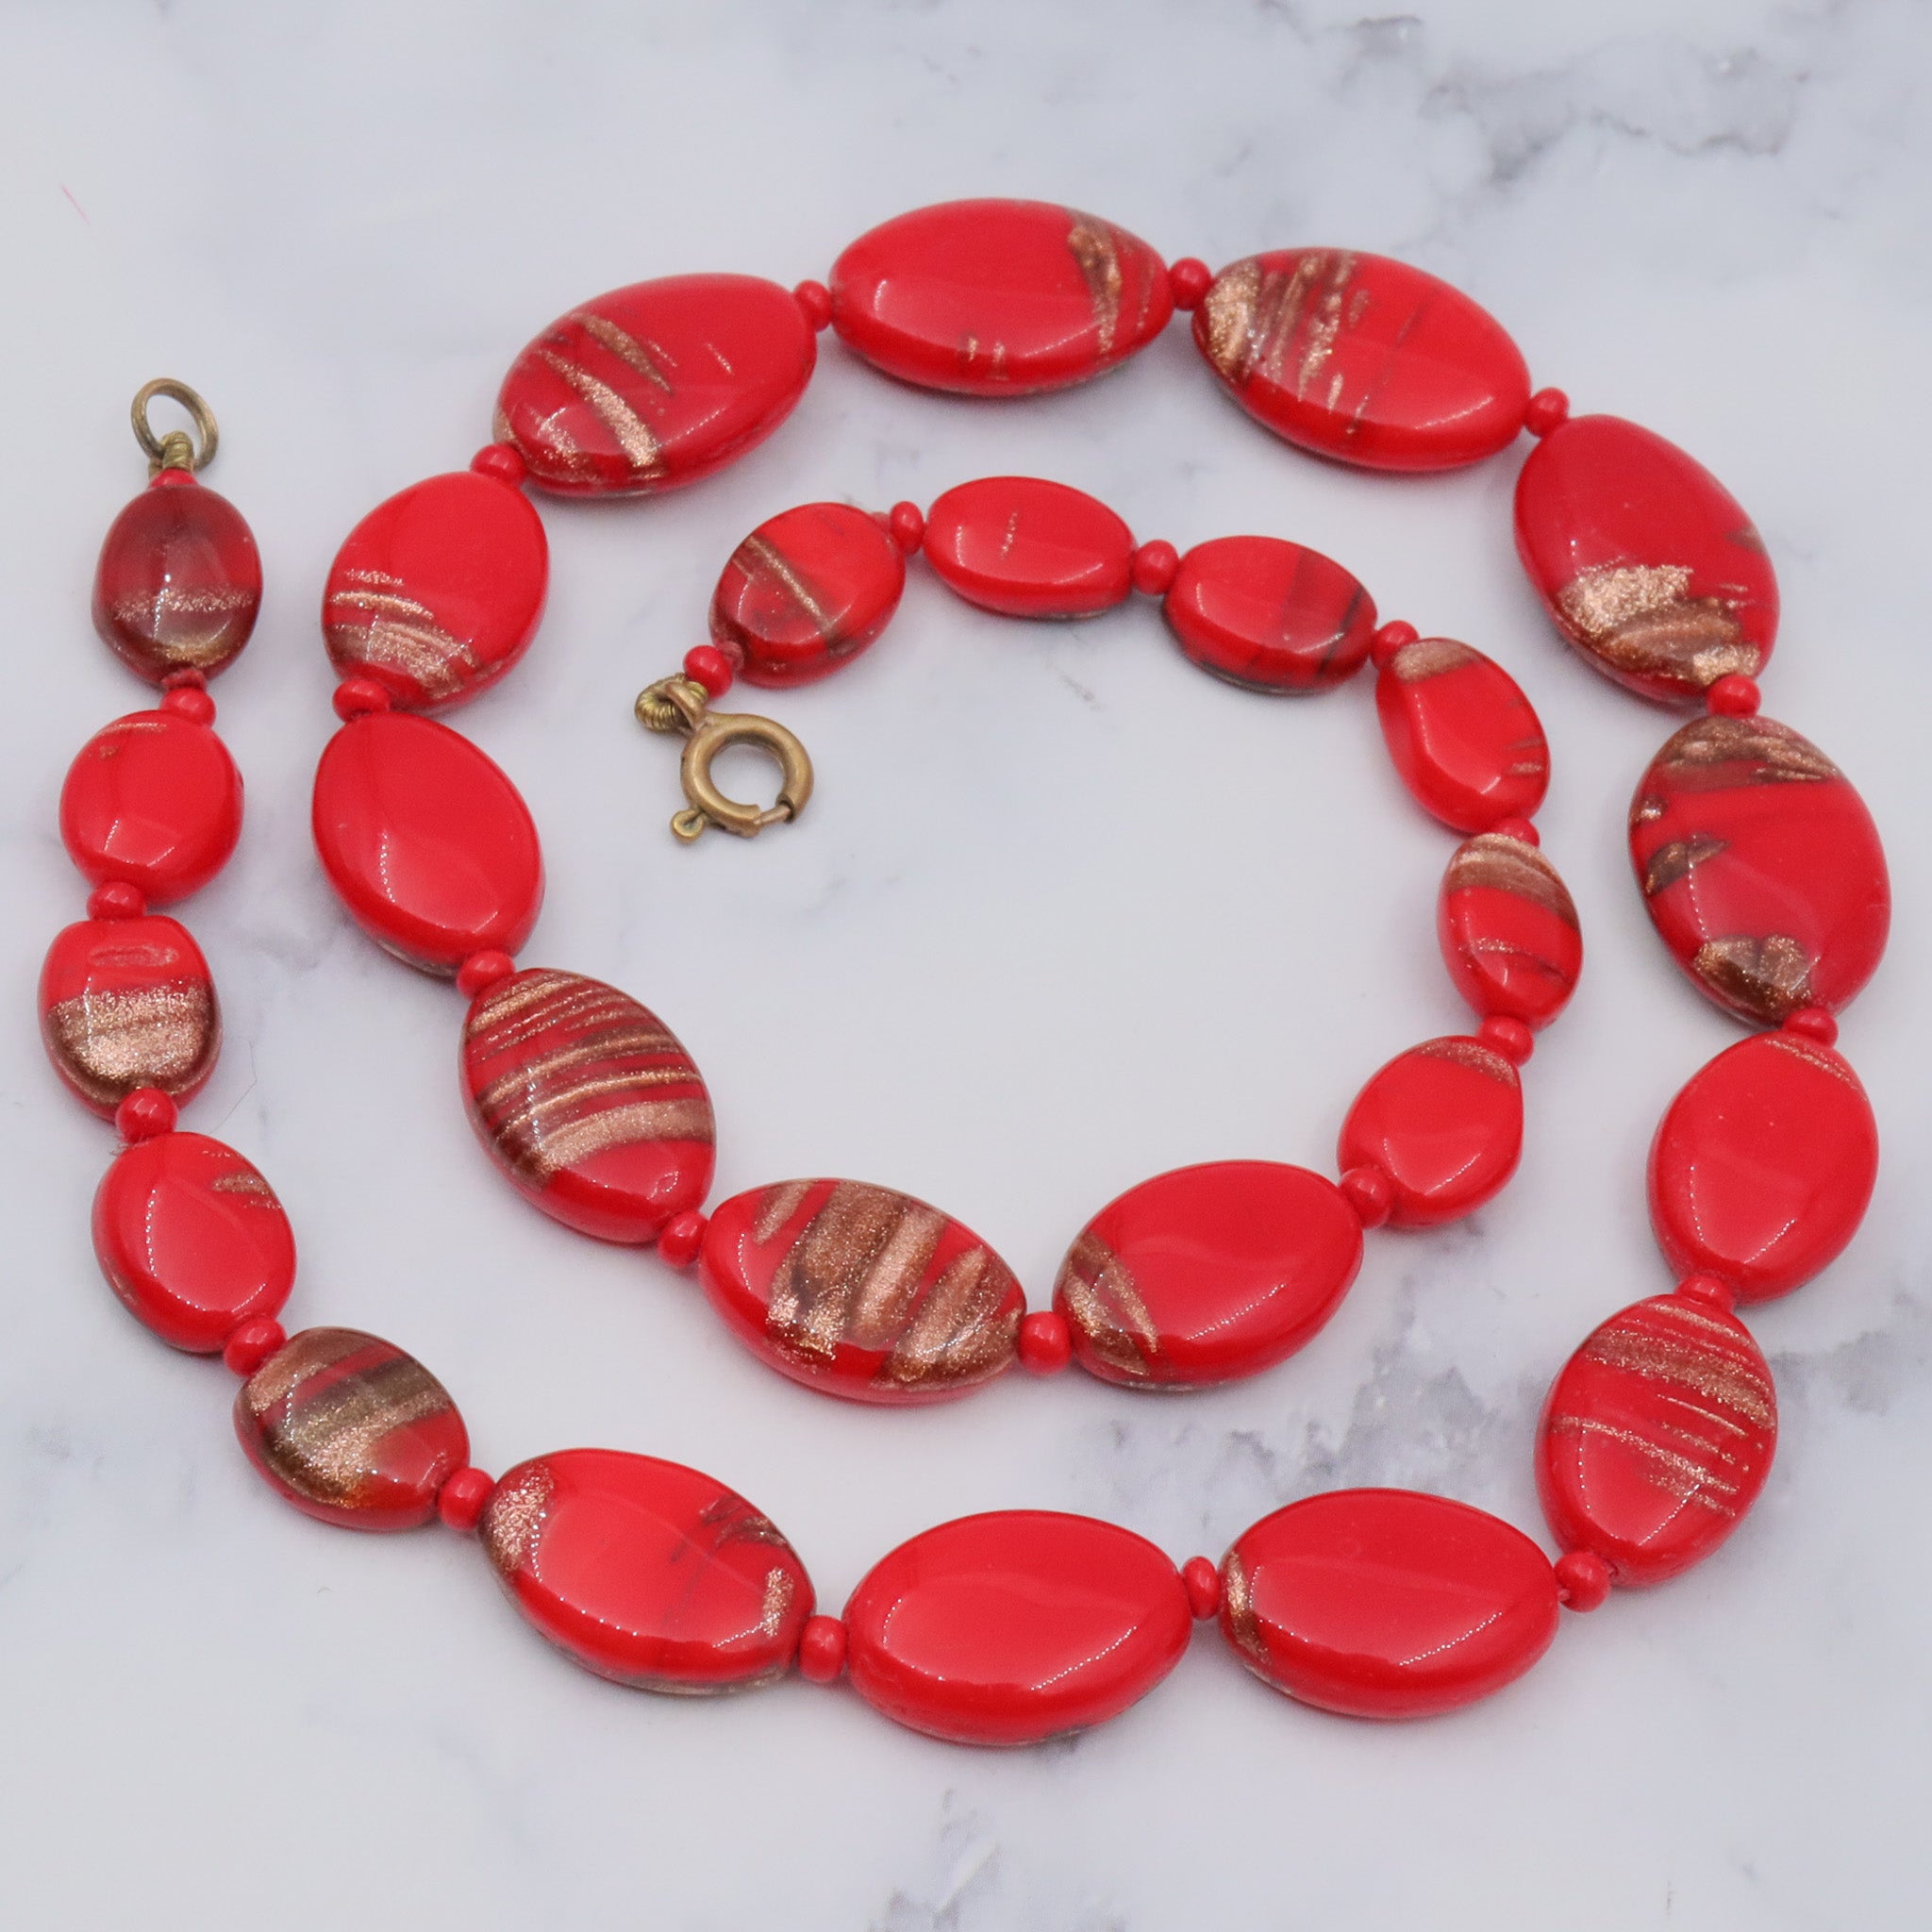 Antique handmade venetian Murano glass red with copper glitter necklace, 18”